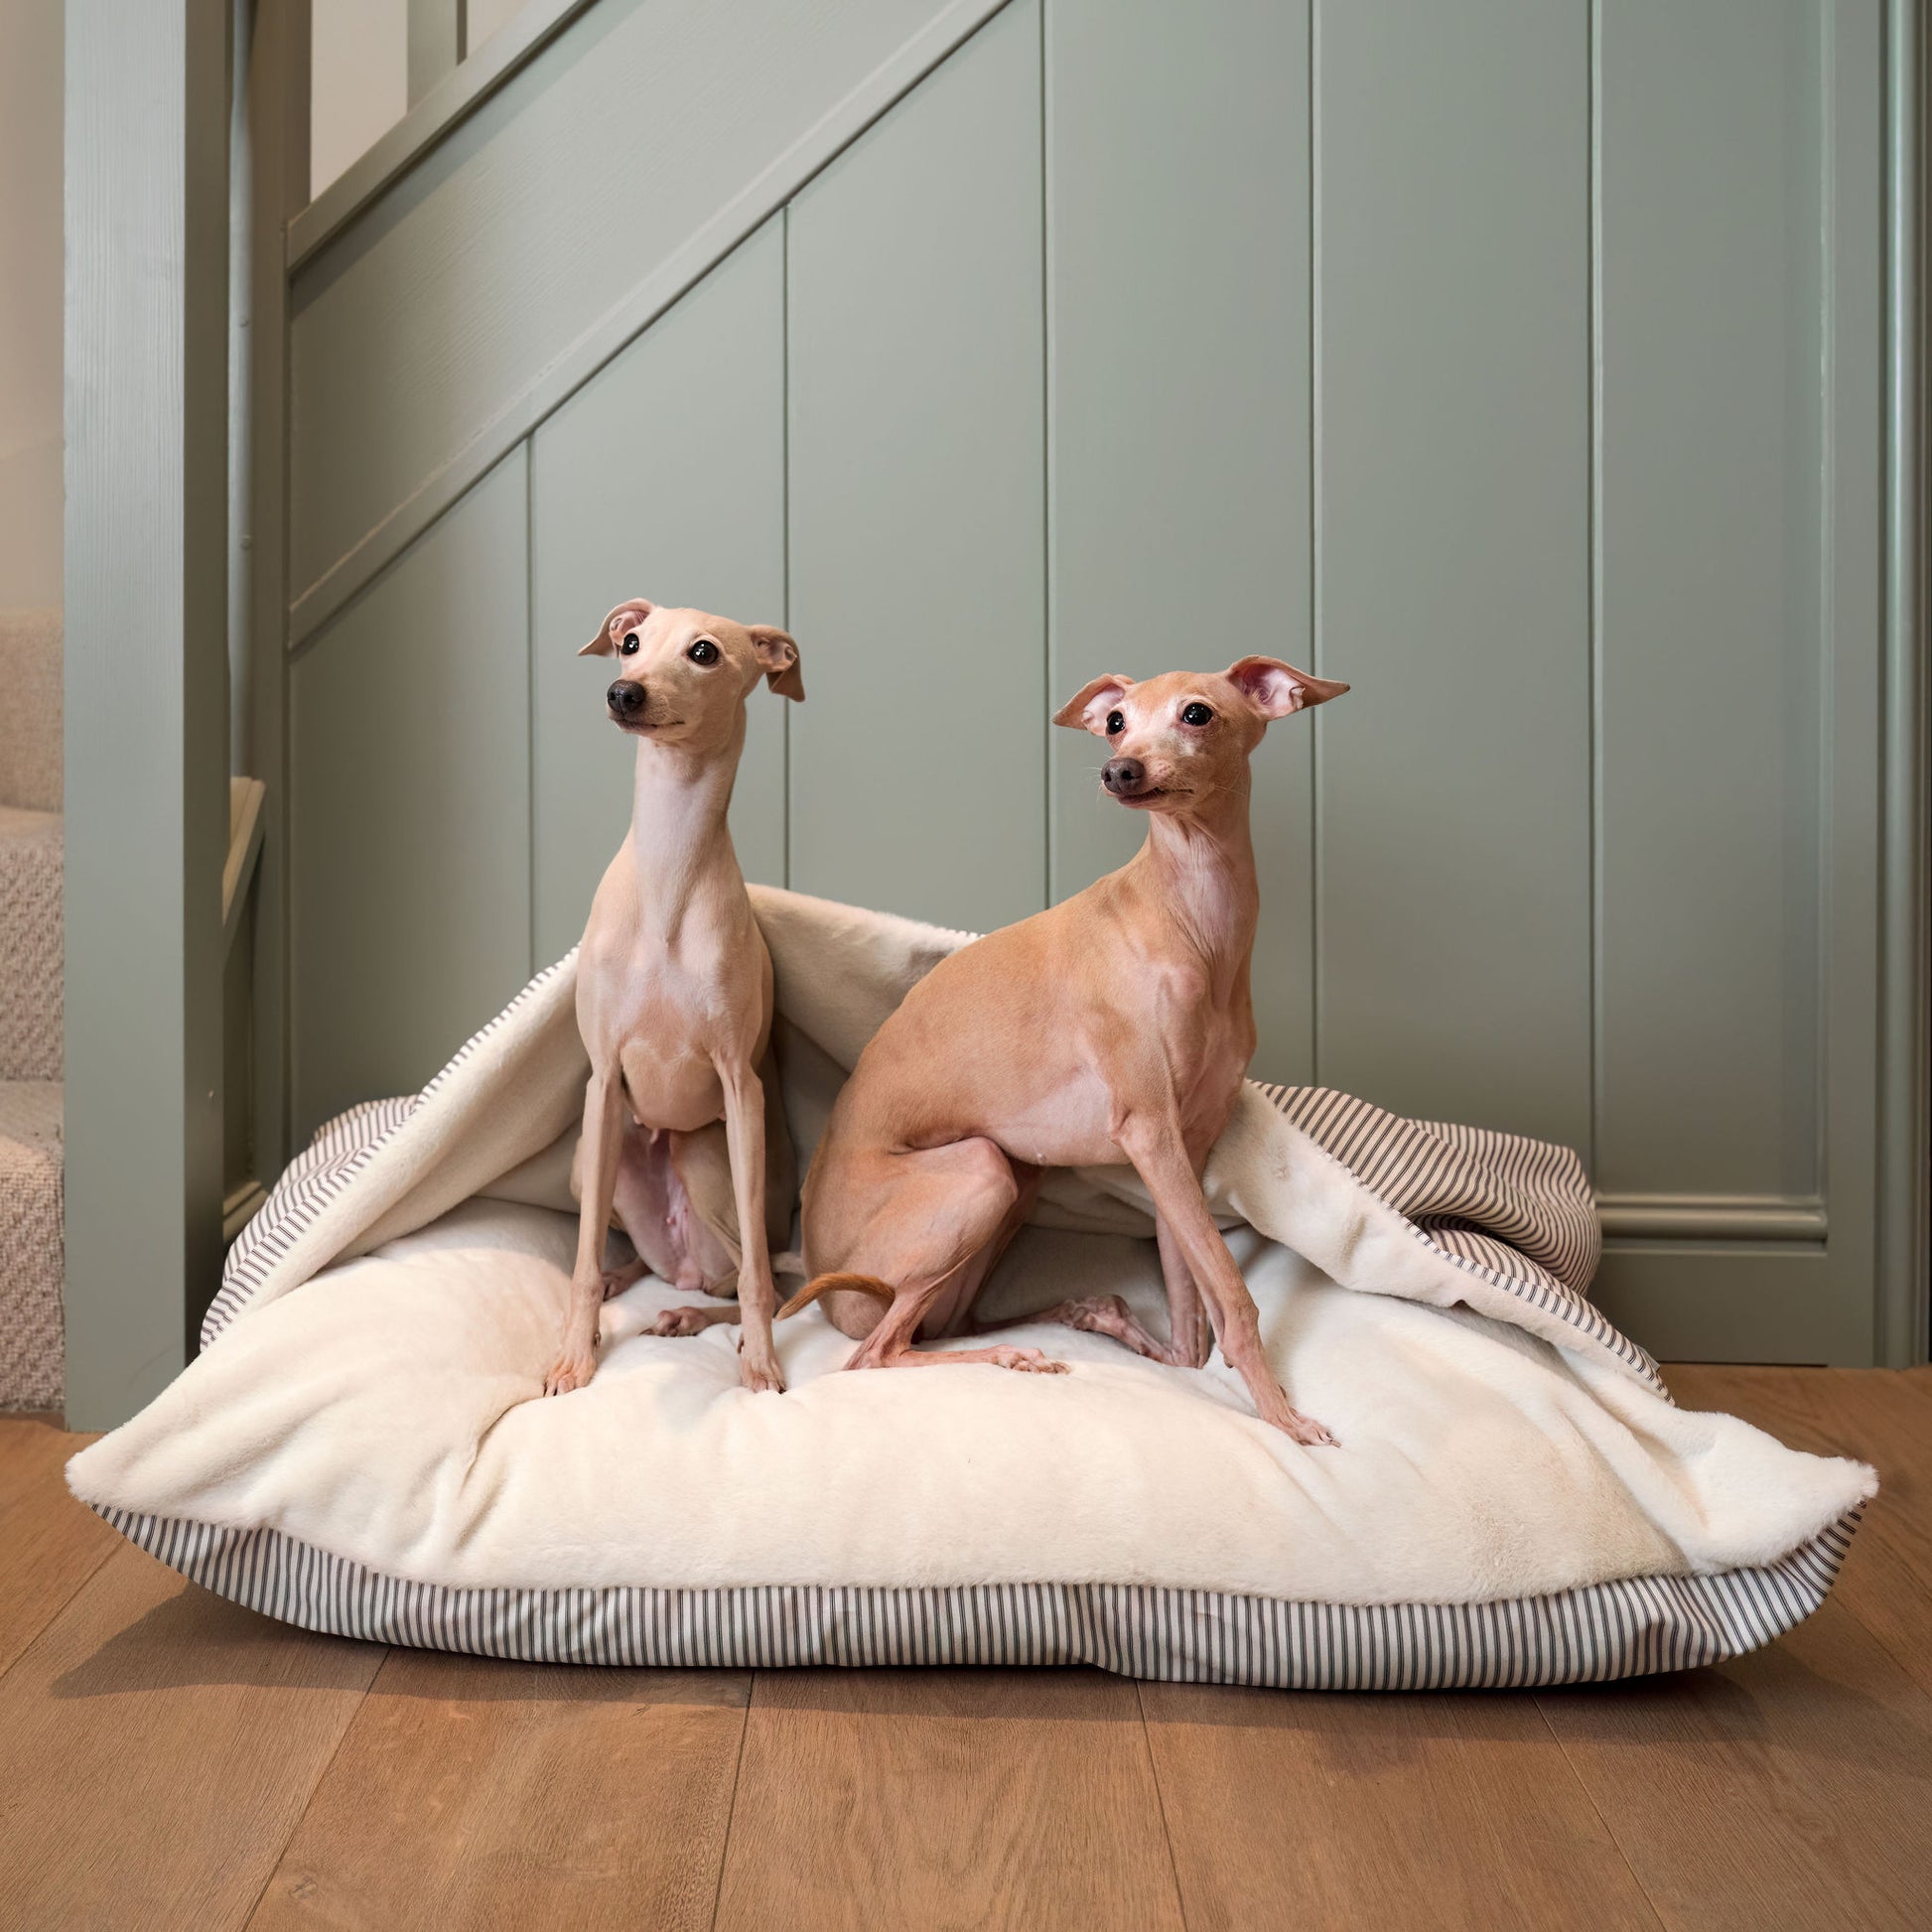 Discover The Perfect Burrow For Your Pet, Our Stunning Sleepy Burrow Dog Beds In Regency Stripe, Is The Perfect Bed Choice For Your Pet, Available Now at Lords & Labradors